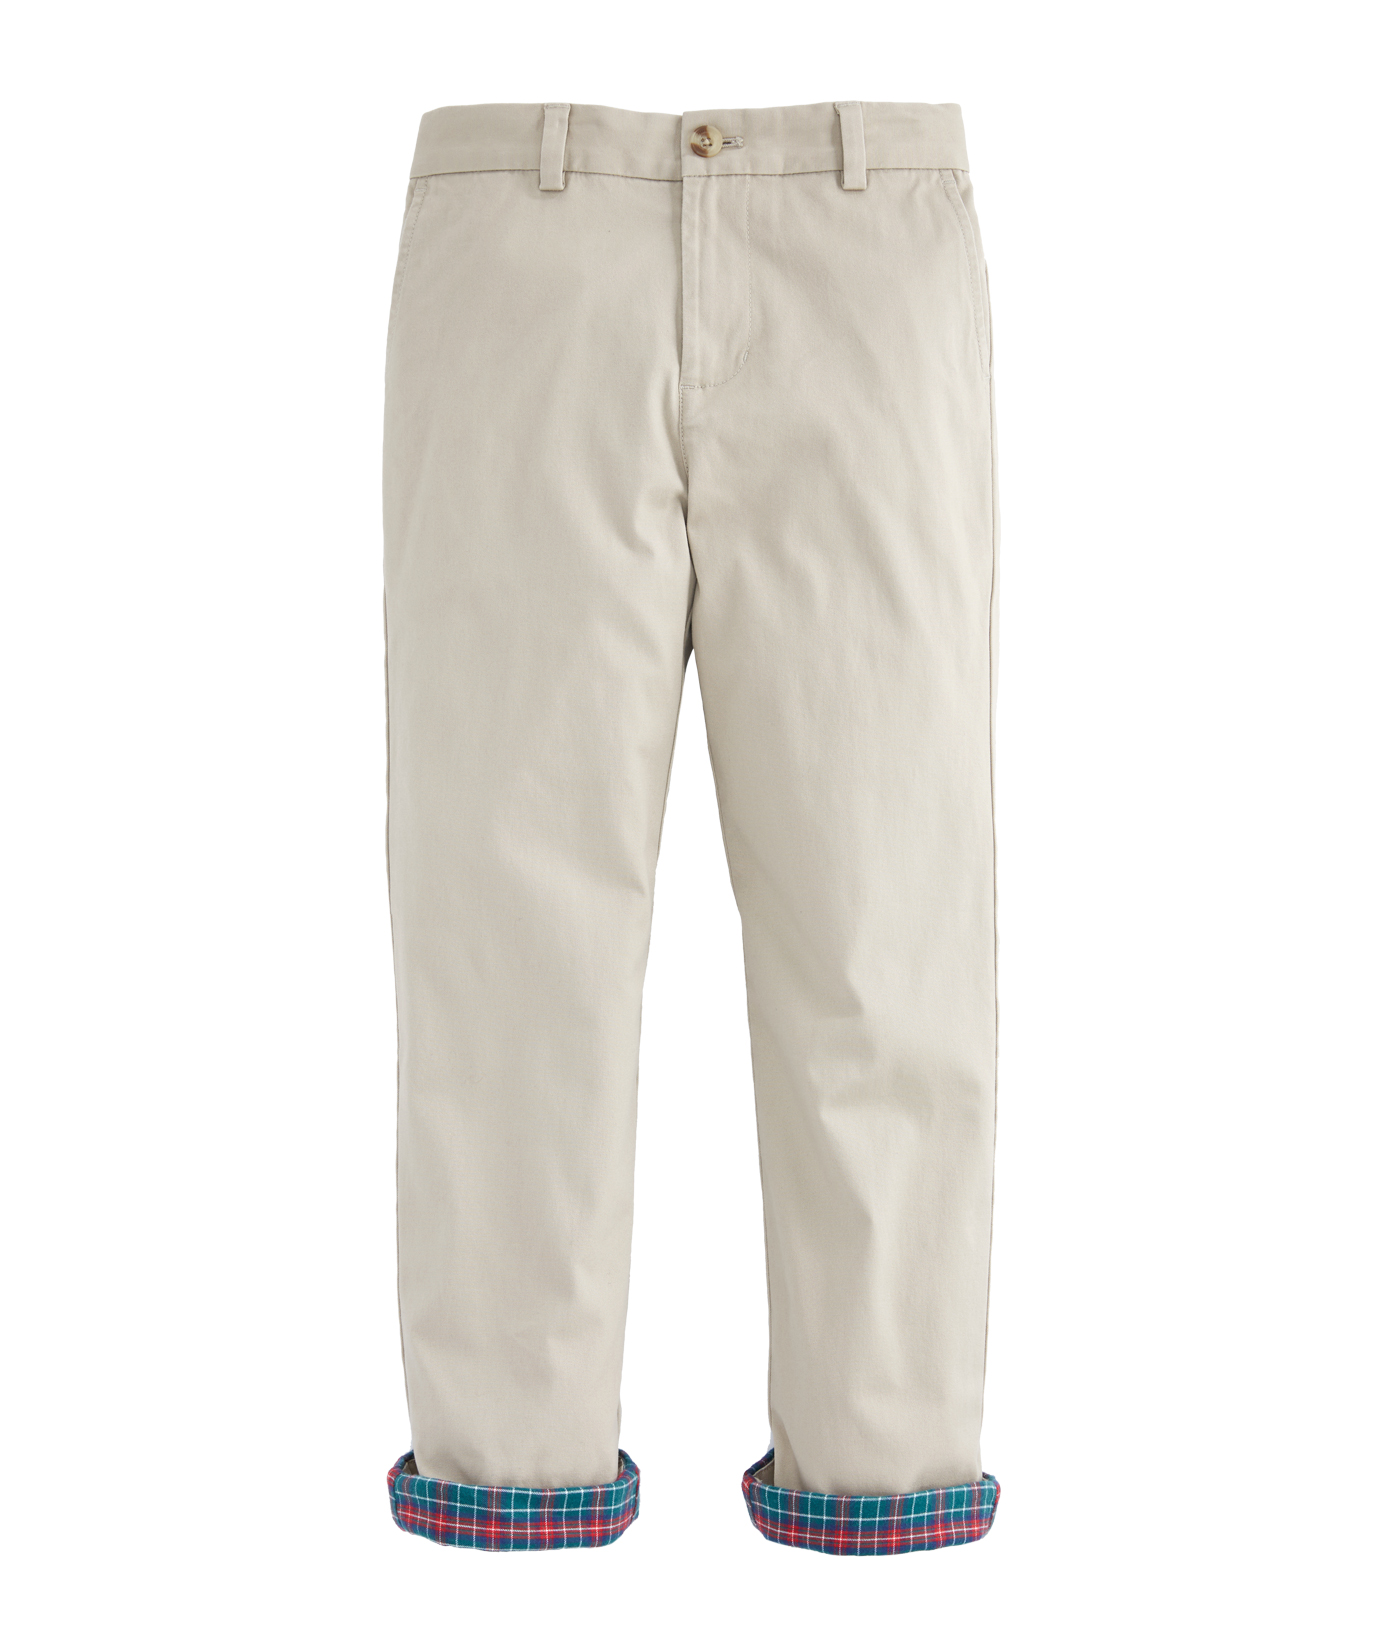 boys flannel lined pants